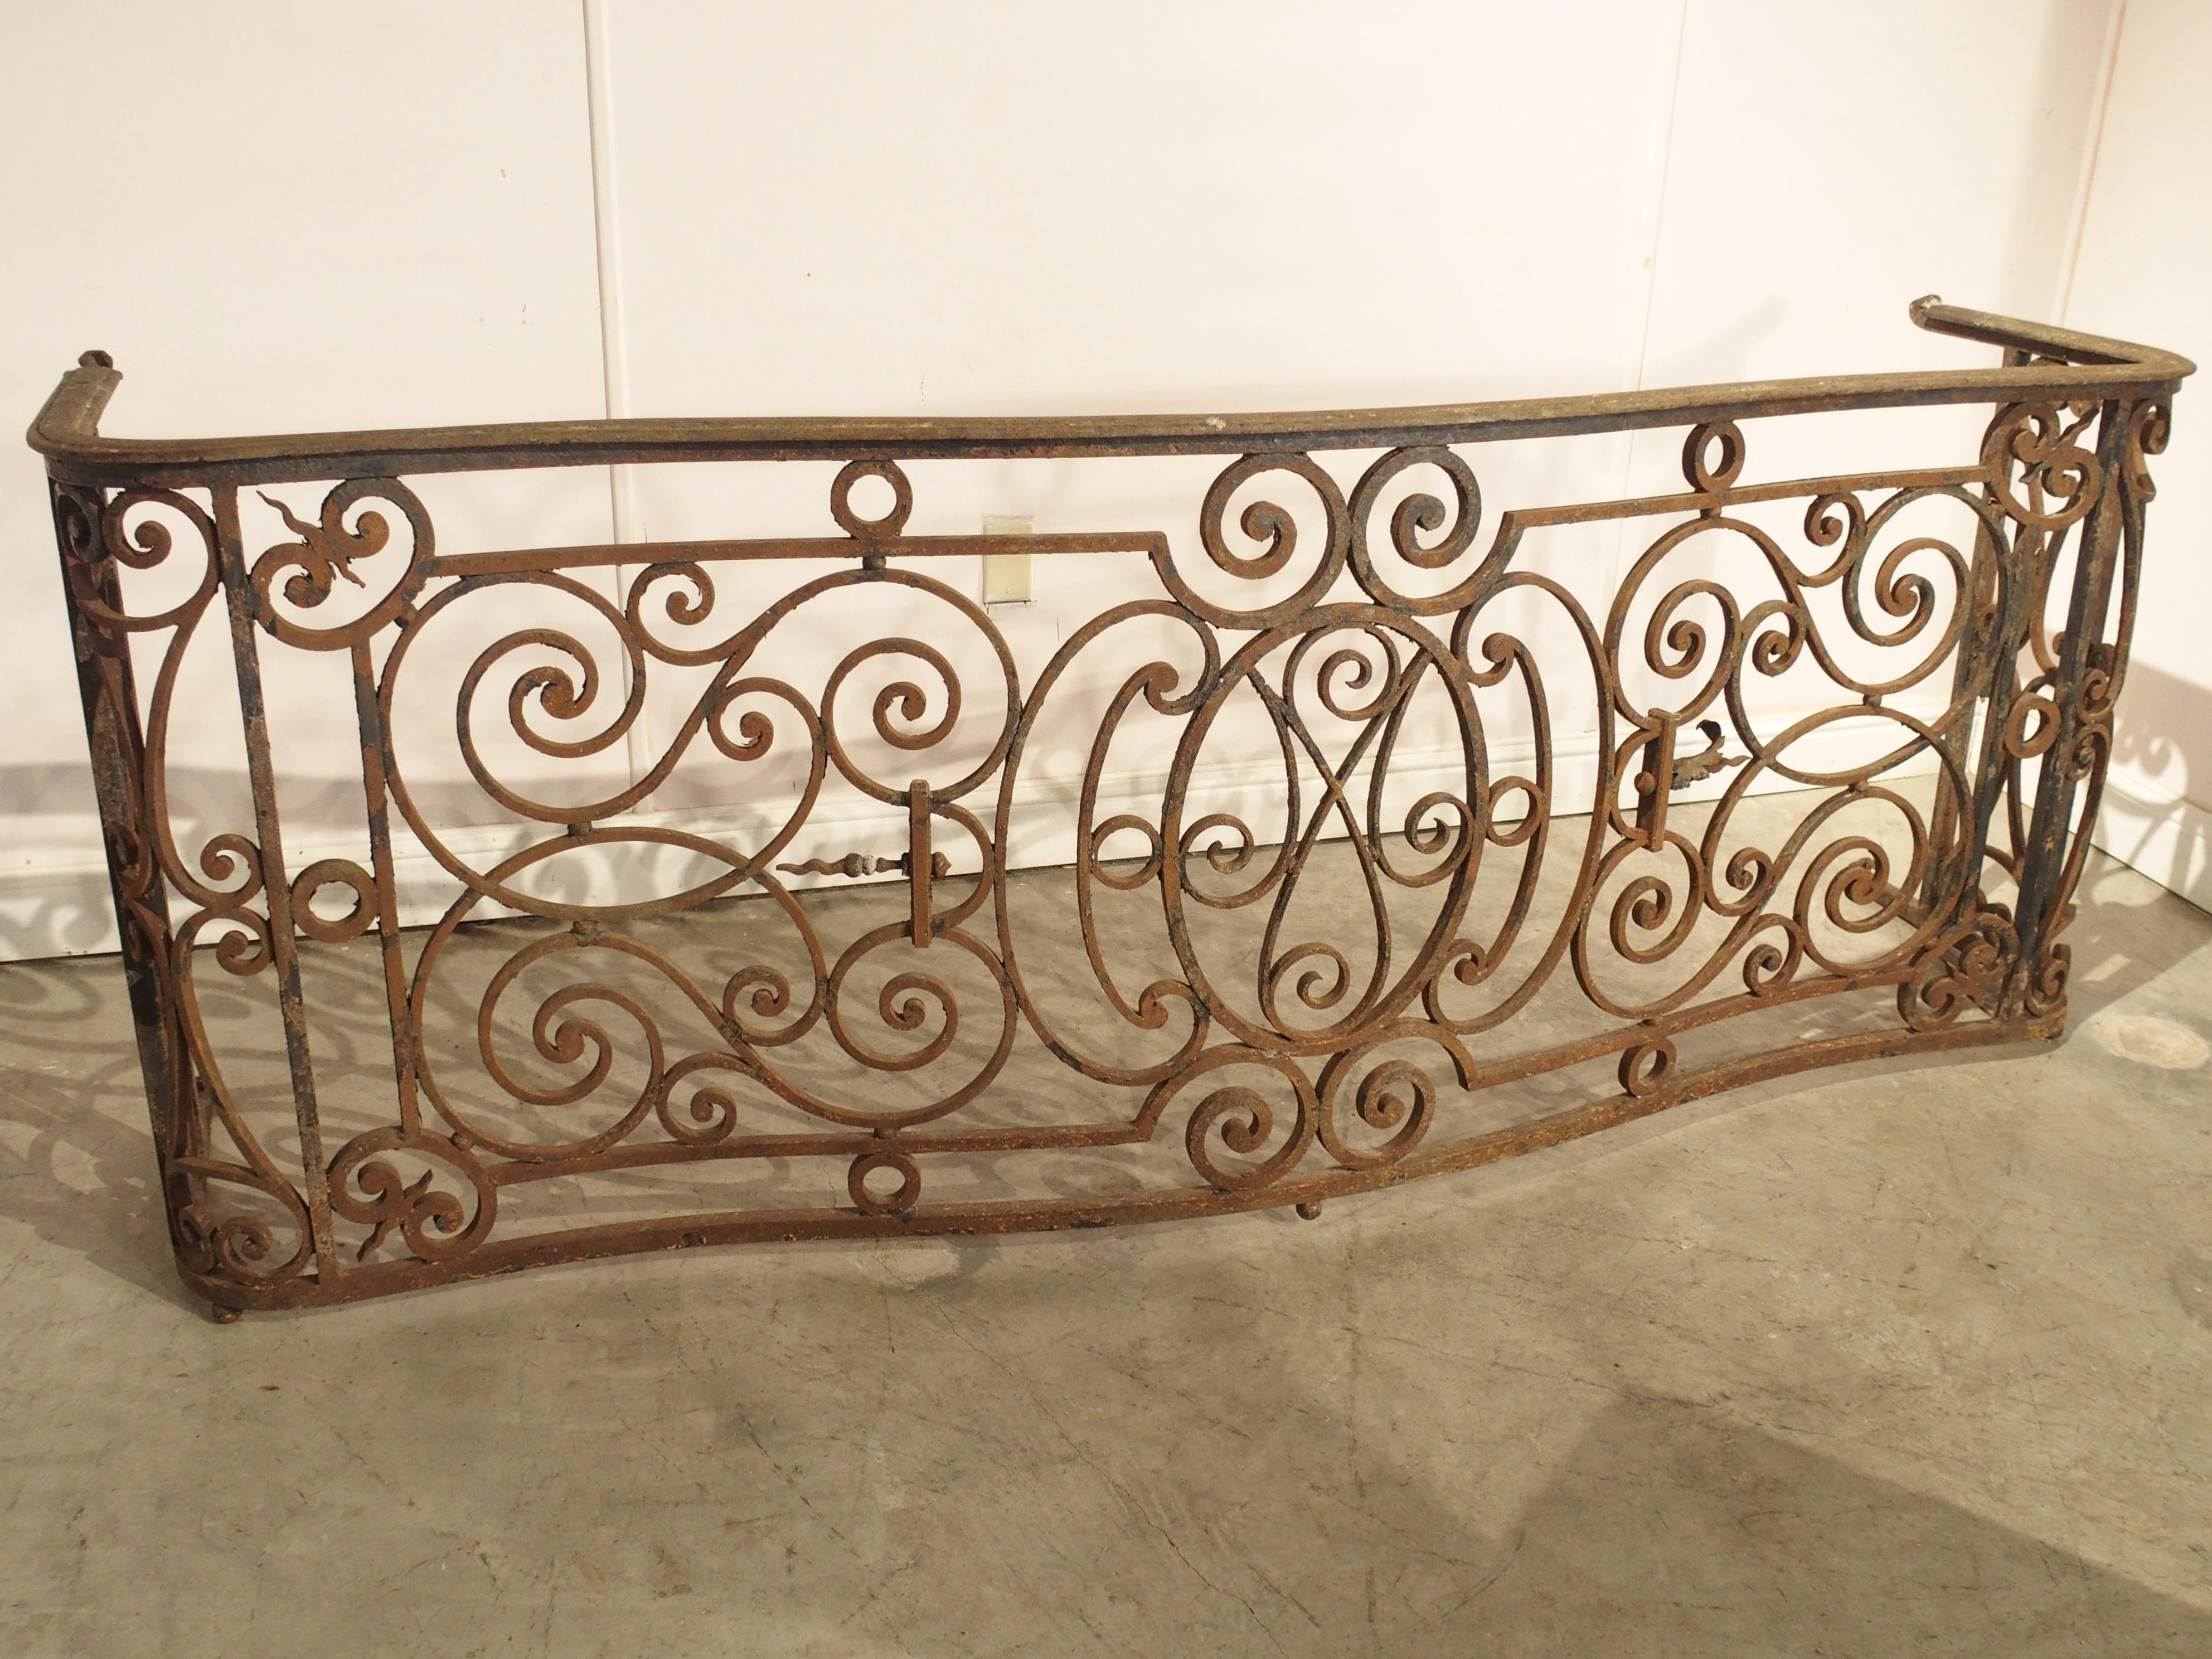 This beautiful French wrought iron balcony railing has been shaped in a form known as arbalete, or crossbow. The thick top rail has thin molding along the edges and features intact rear supports, which would have been anchored into the side of the